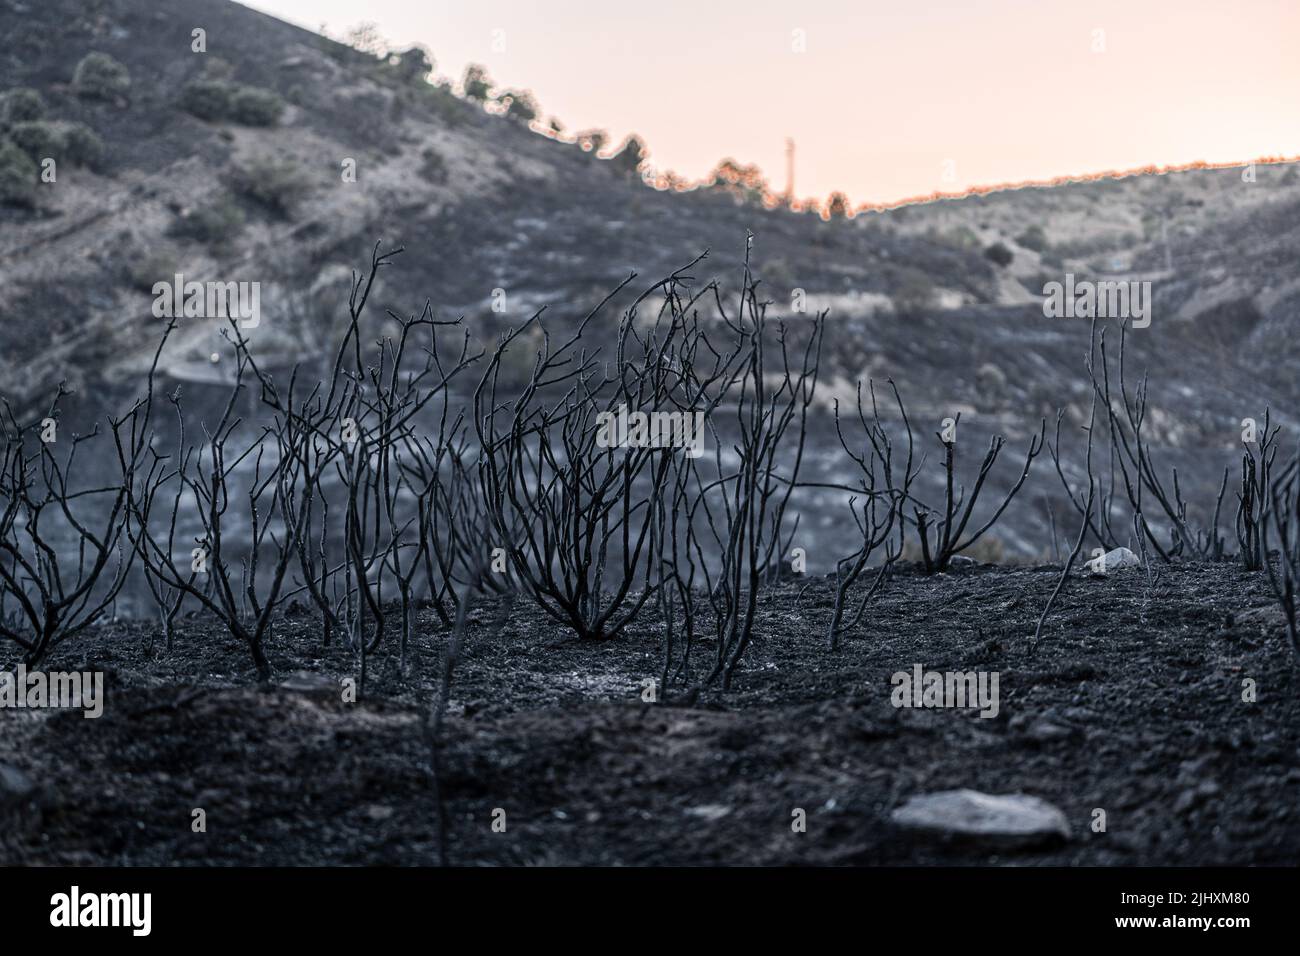 Madrid, Spain. 20th July, 2022. The mountain of Valdepeñas de la Sierra devastated by the flames of the fire. The Red Cross shelter in the town of Uceda, next to Valdepeñas de la Sierra, welcomed more than 150 people from the towns affected by the fire. The forest fire that lasted more than 48 hours in Valdepeñas de la Sierra, 80 kilometers from Madrid, Spain, destroyed more than 3,000 hectares. The authorities suspect that the fire could have been caused by a pyromaniac during the days of high heat temperatures recorded in Spain. Credit: SOPA Images Limited/Alamy Live News Stock Photo